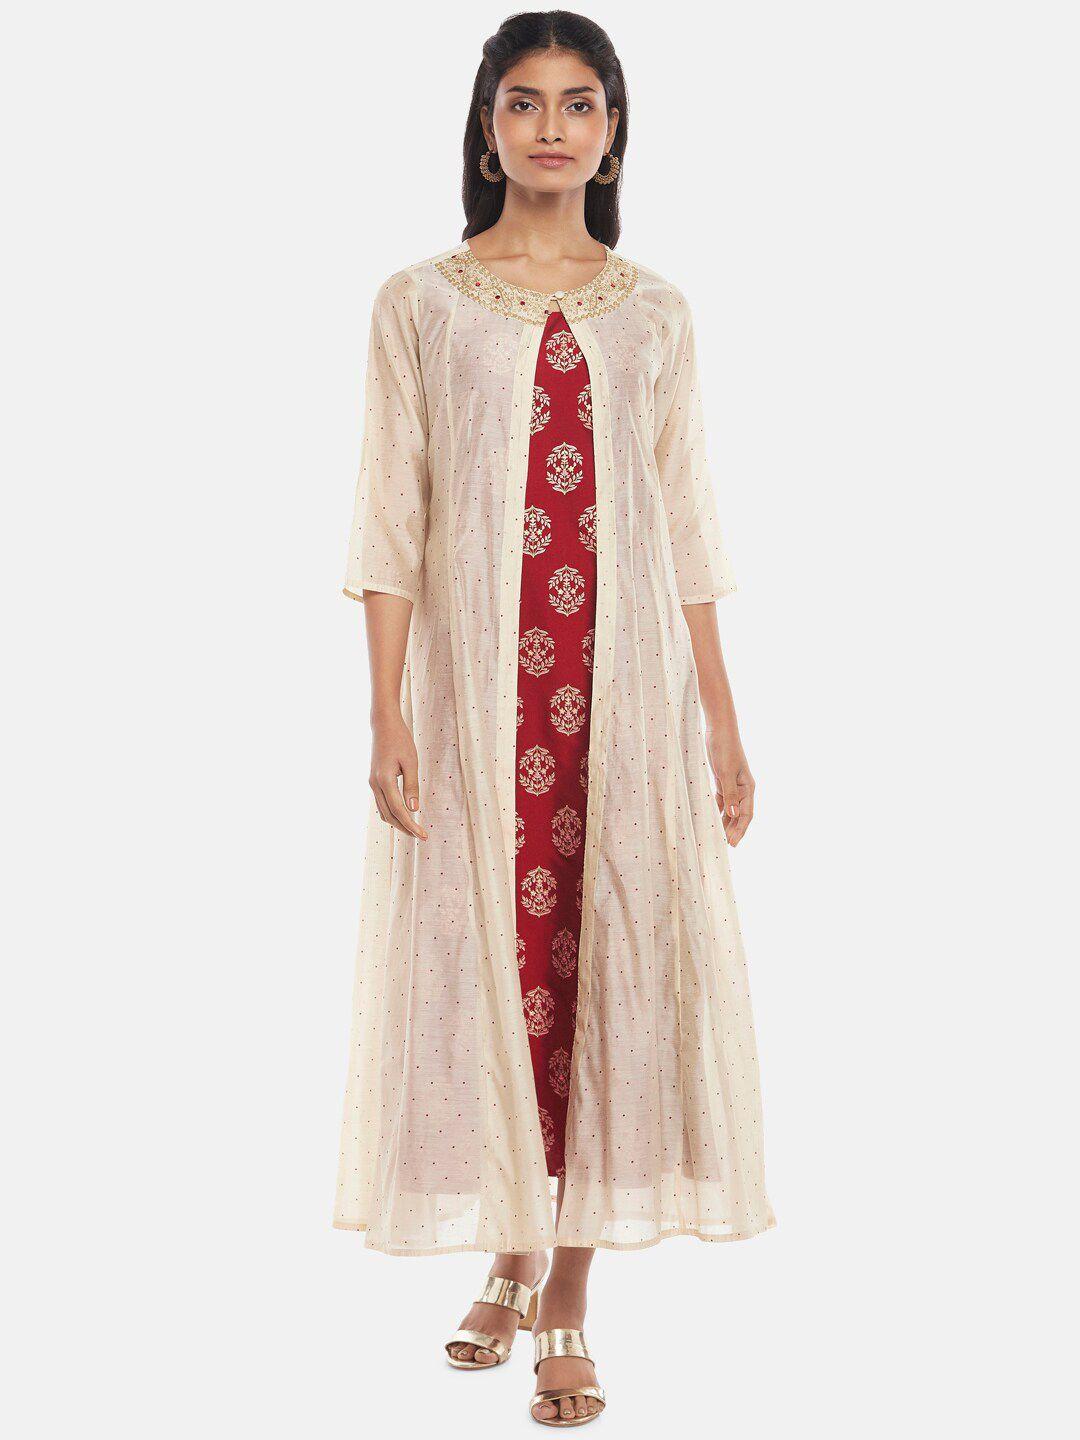 rangmanch-by-pantaloons-beige-&-maroon-ethnic-motifs-embroidered-a-line-maxi-dress